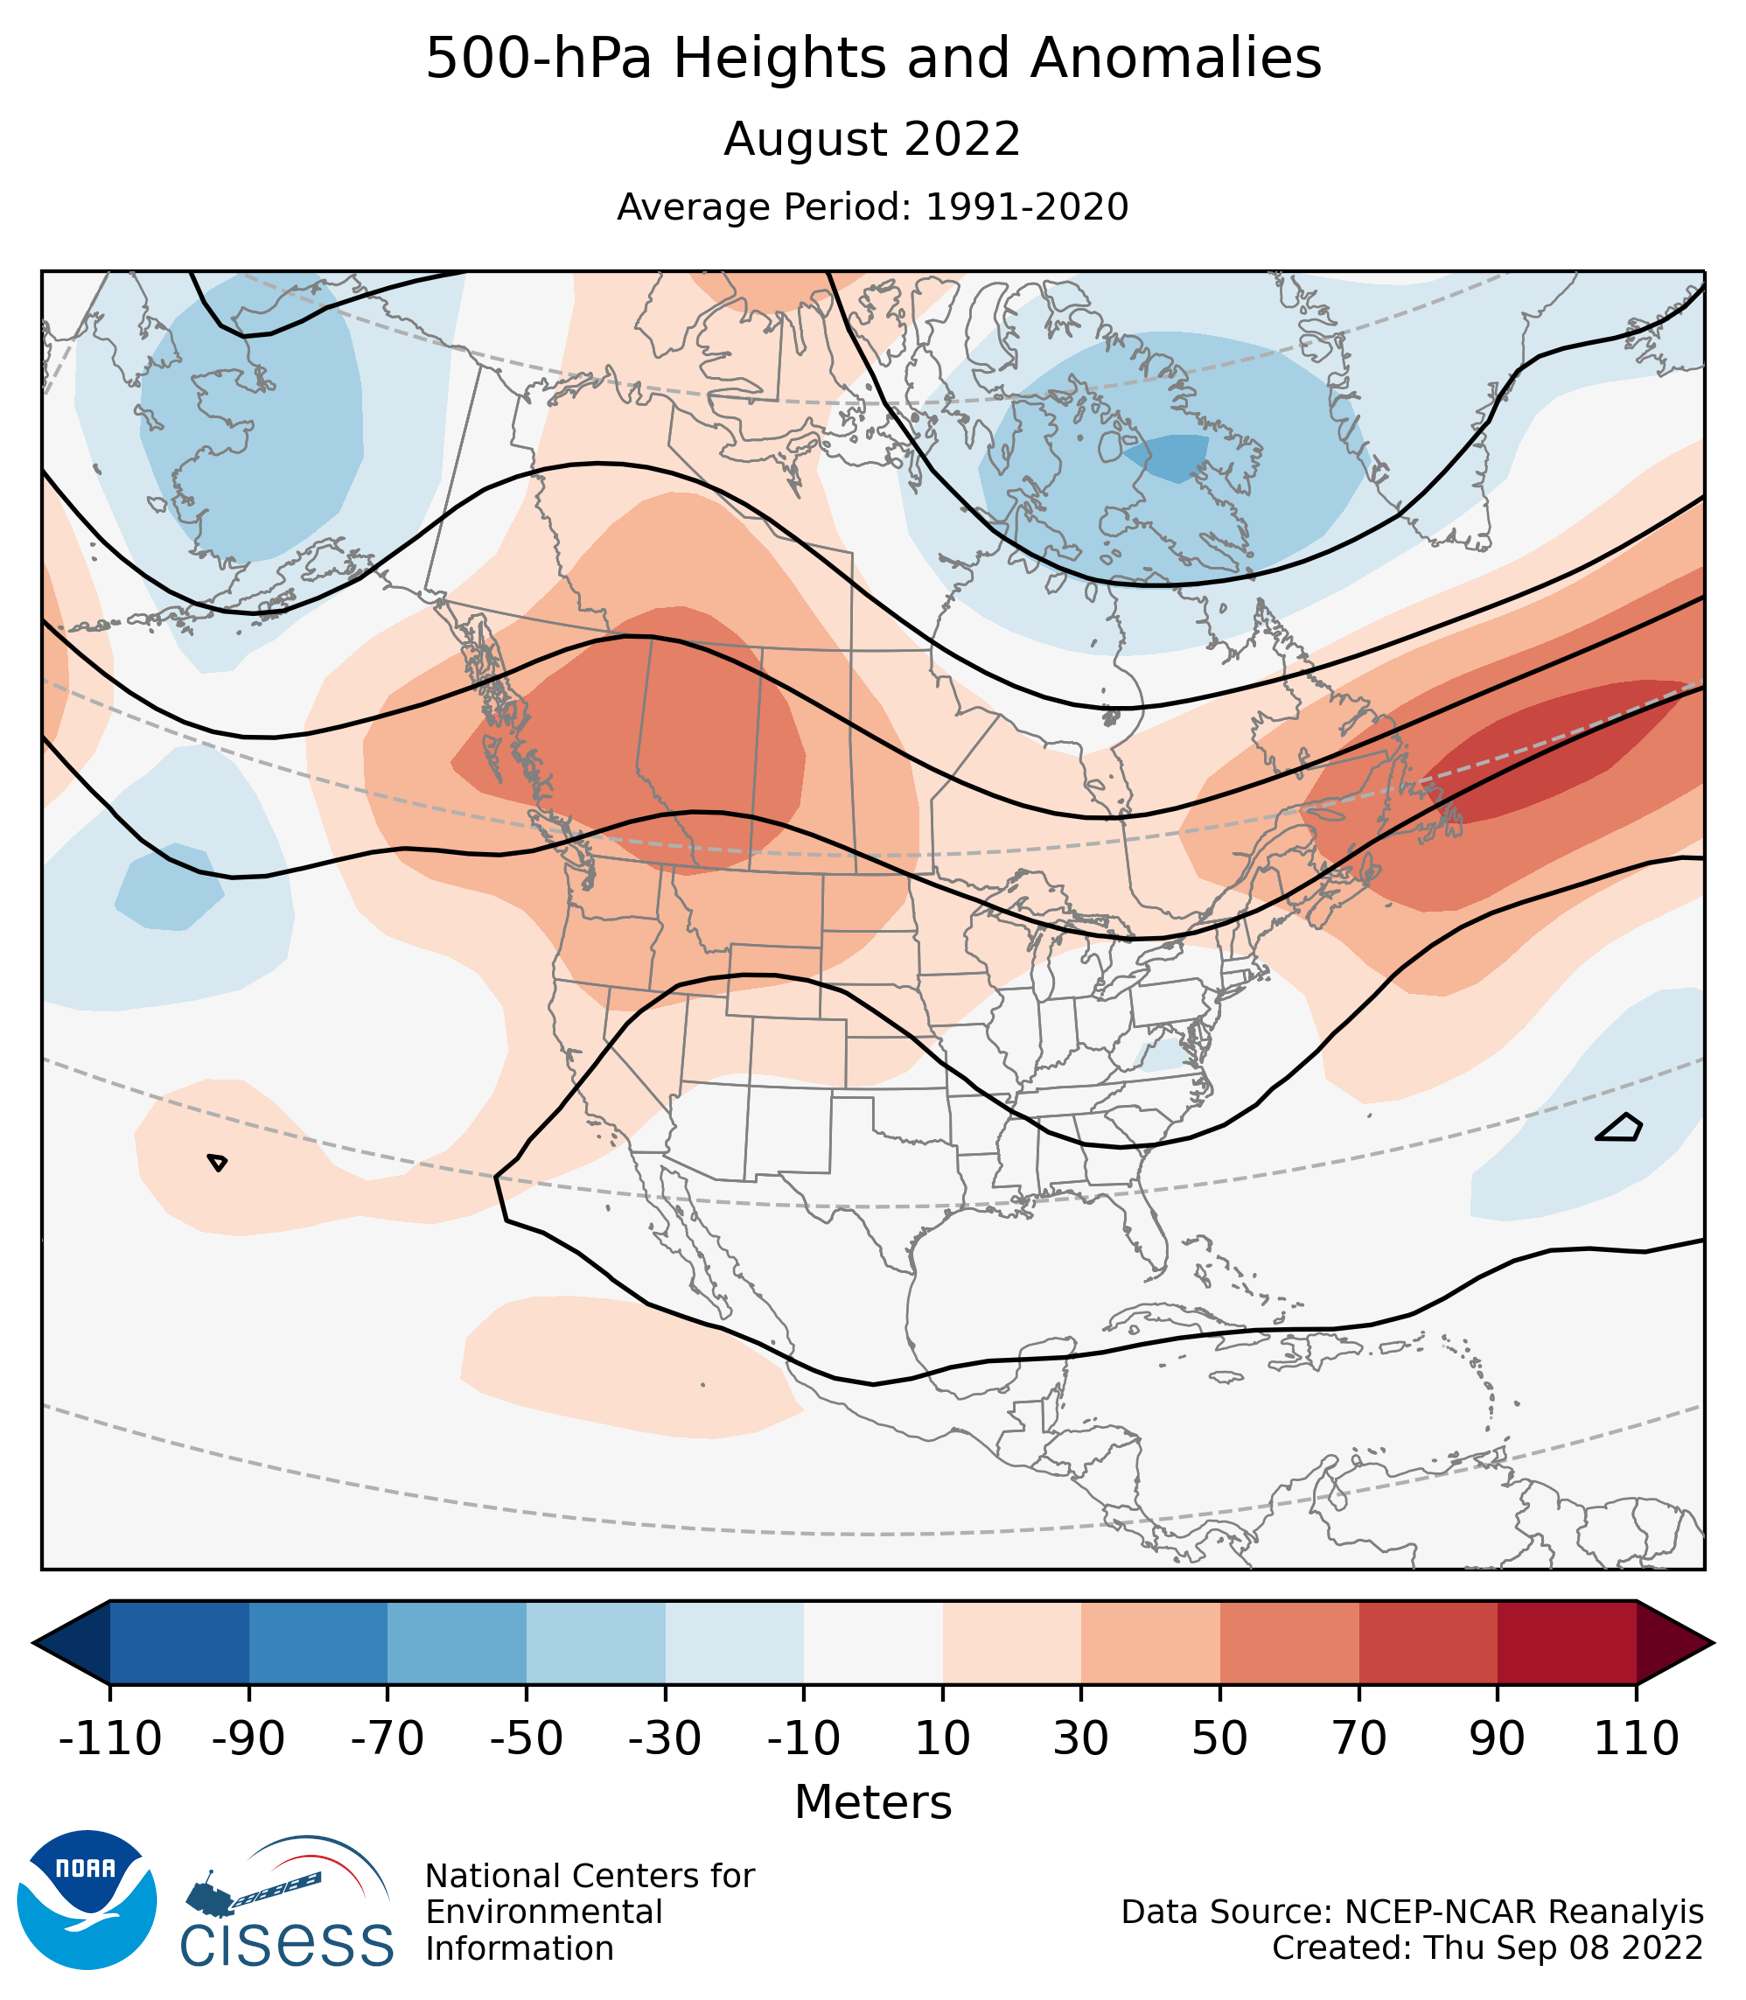 500-mb height mean (contours) and anomalies (shading) for North America for August 2022